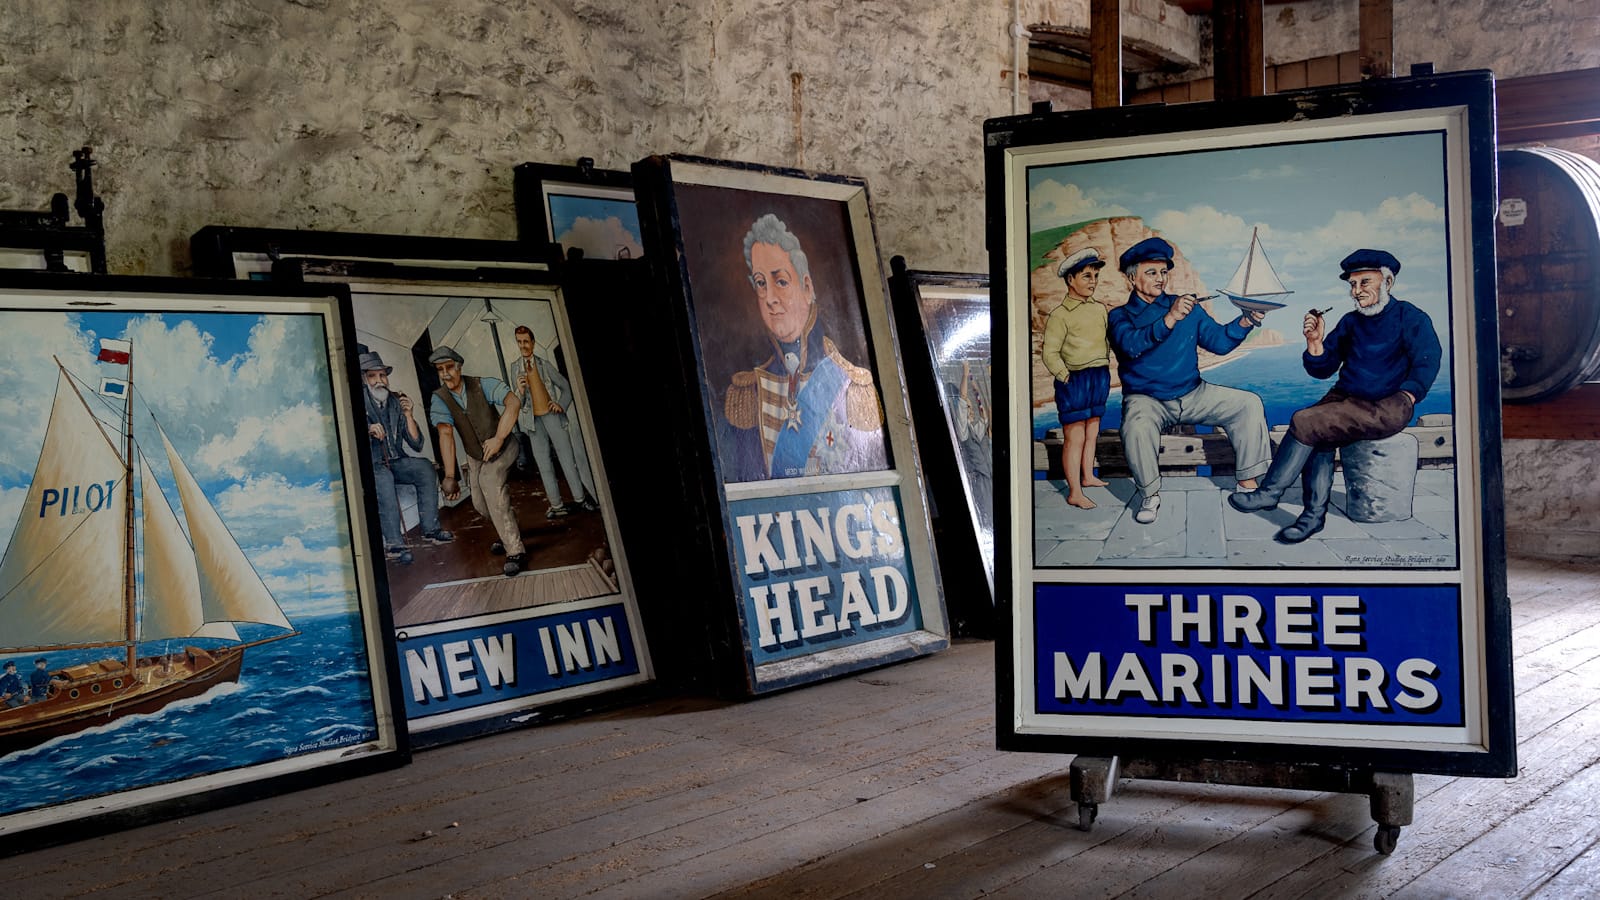 A room with stone walls and wooden floor. Set on an easel in the foreground is a painted pub sign with the bottom third giving the name as "Three Mariners". The upper portion of this sign has a picture of two seated sailors by the sea smoling pipes while showing a model boat to a boy that is standing beside them. Behind this sign, which is propped up on an easel, are various other pub signs sitting against the stone wall, some stacked two or three deep.